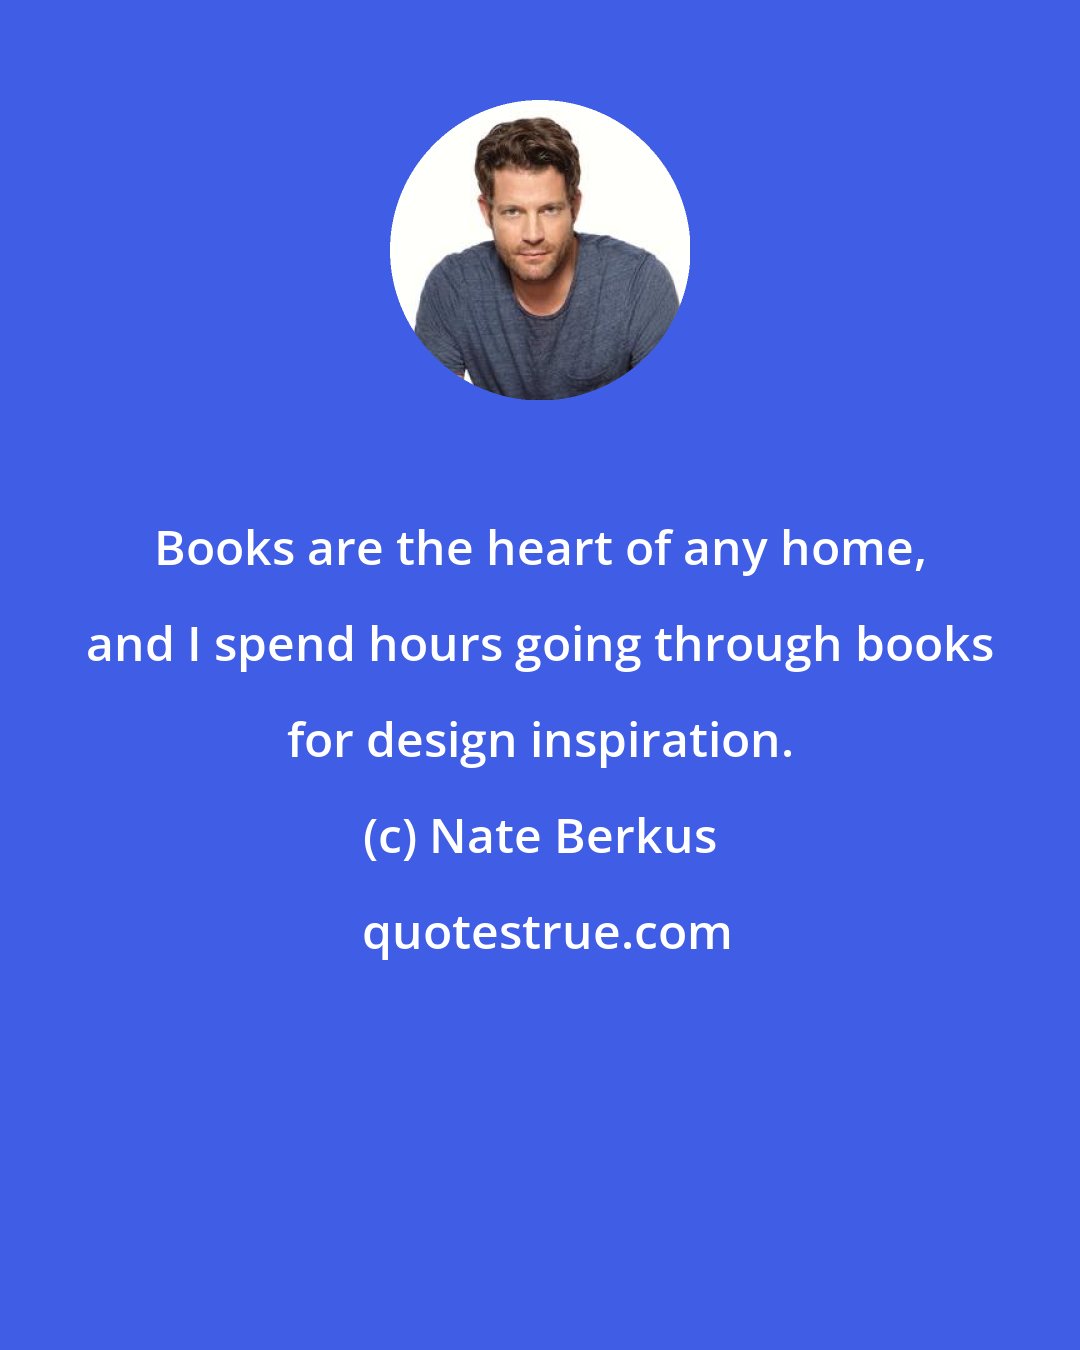 Nate Berkus: Books are the heart of any home, and I spend hours going through books for design inspiration.